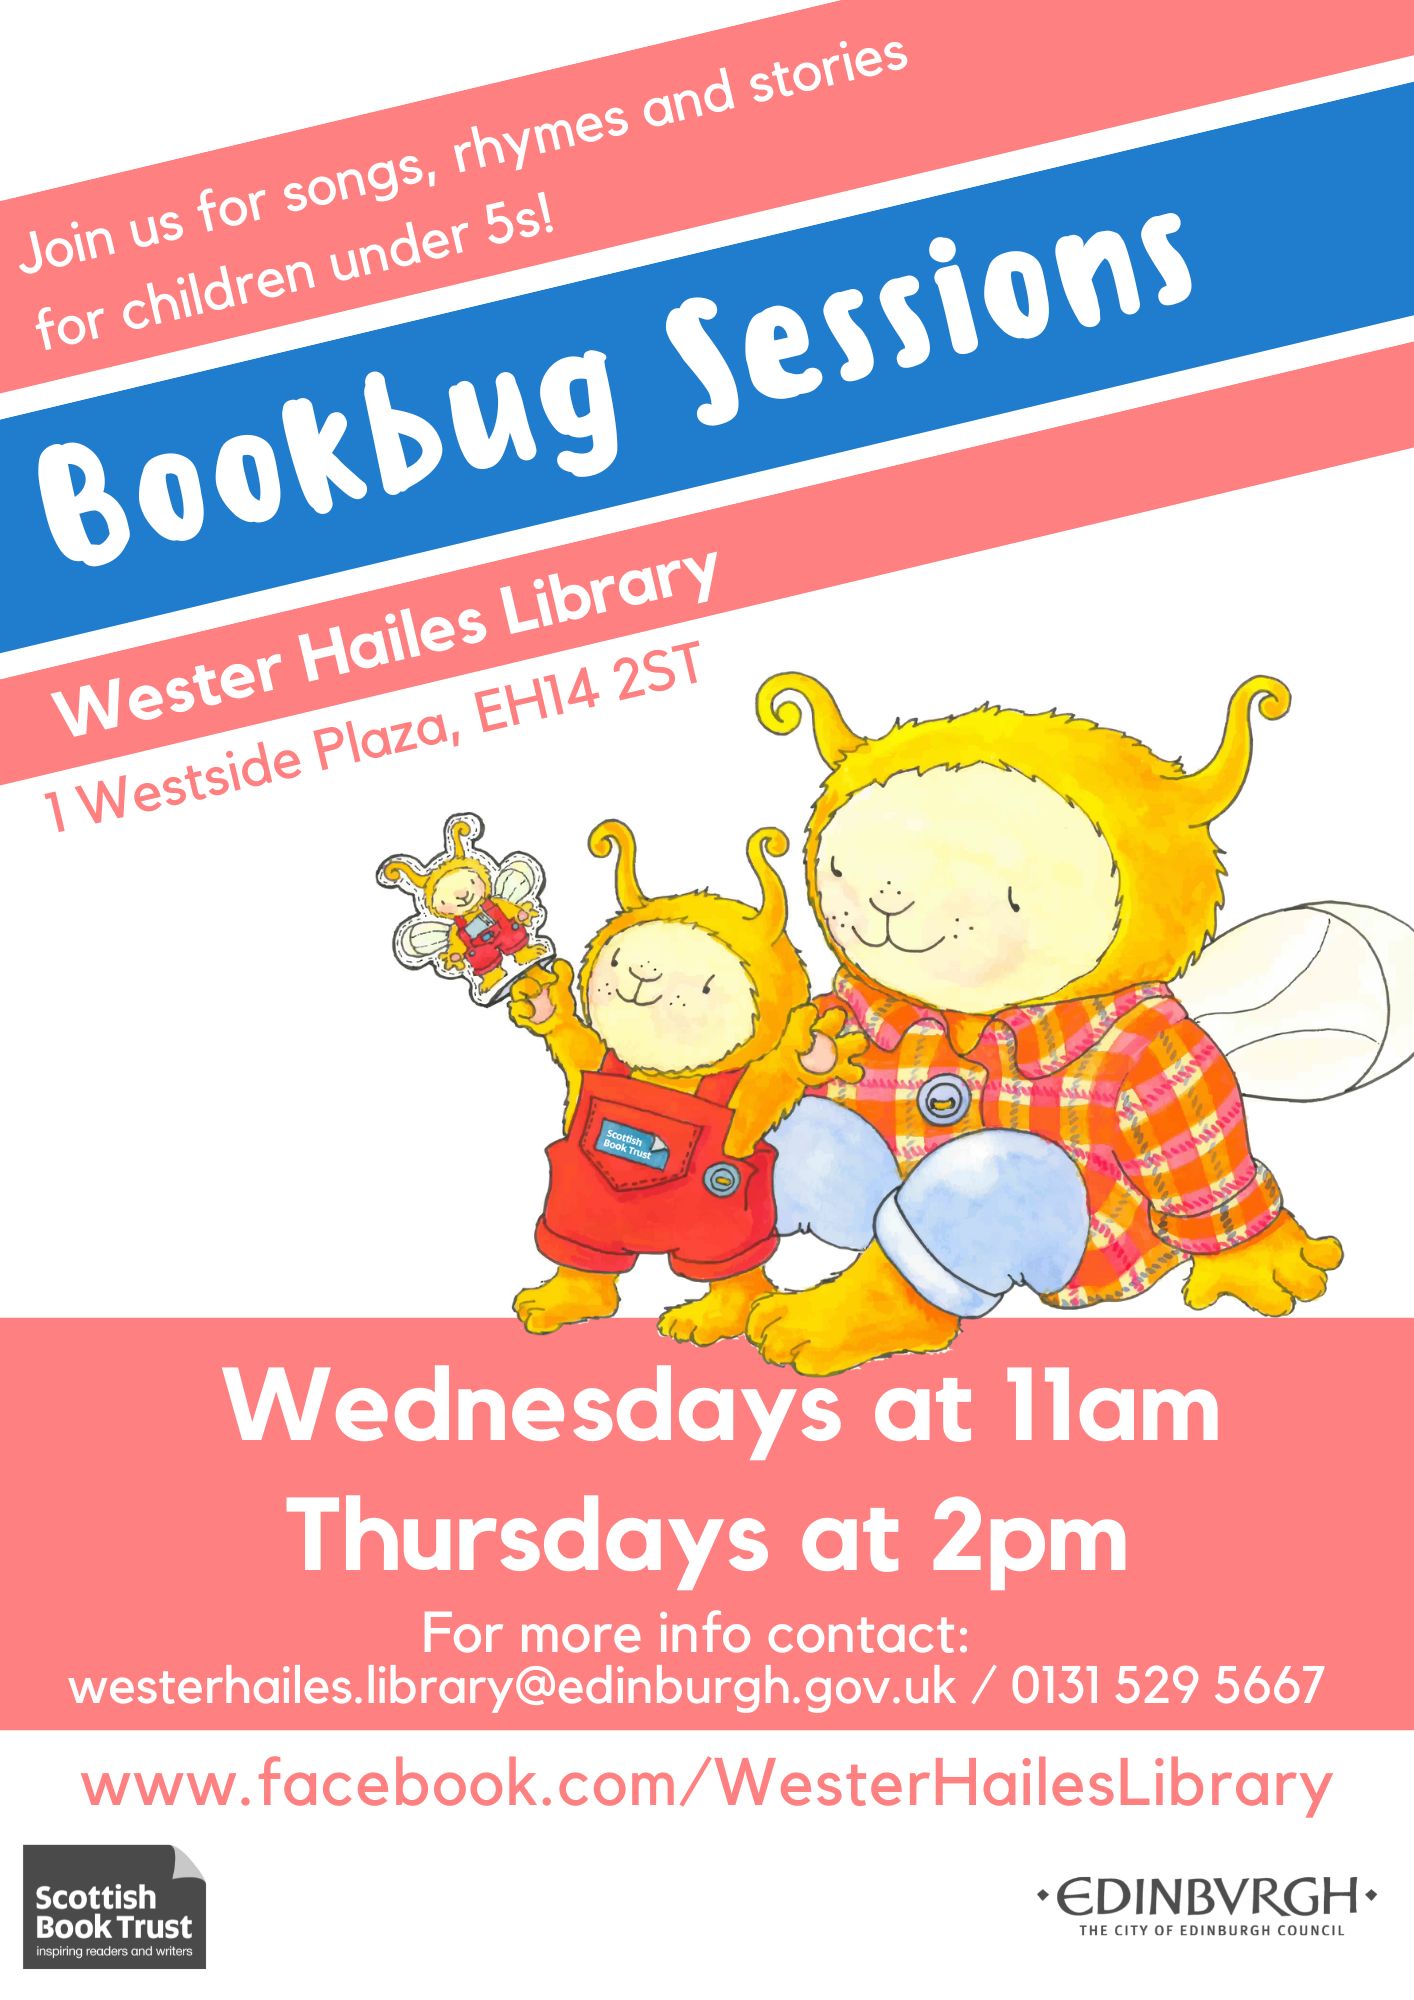 Wester Hailes Library Bookbug Featured Image